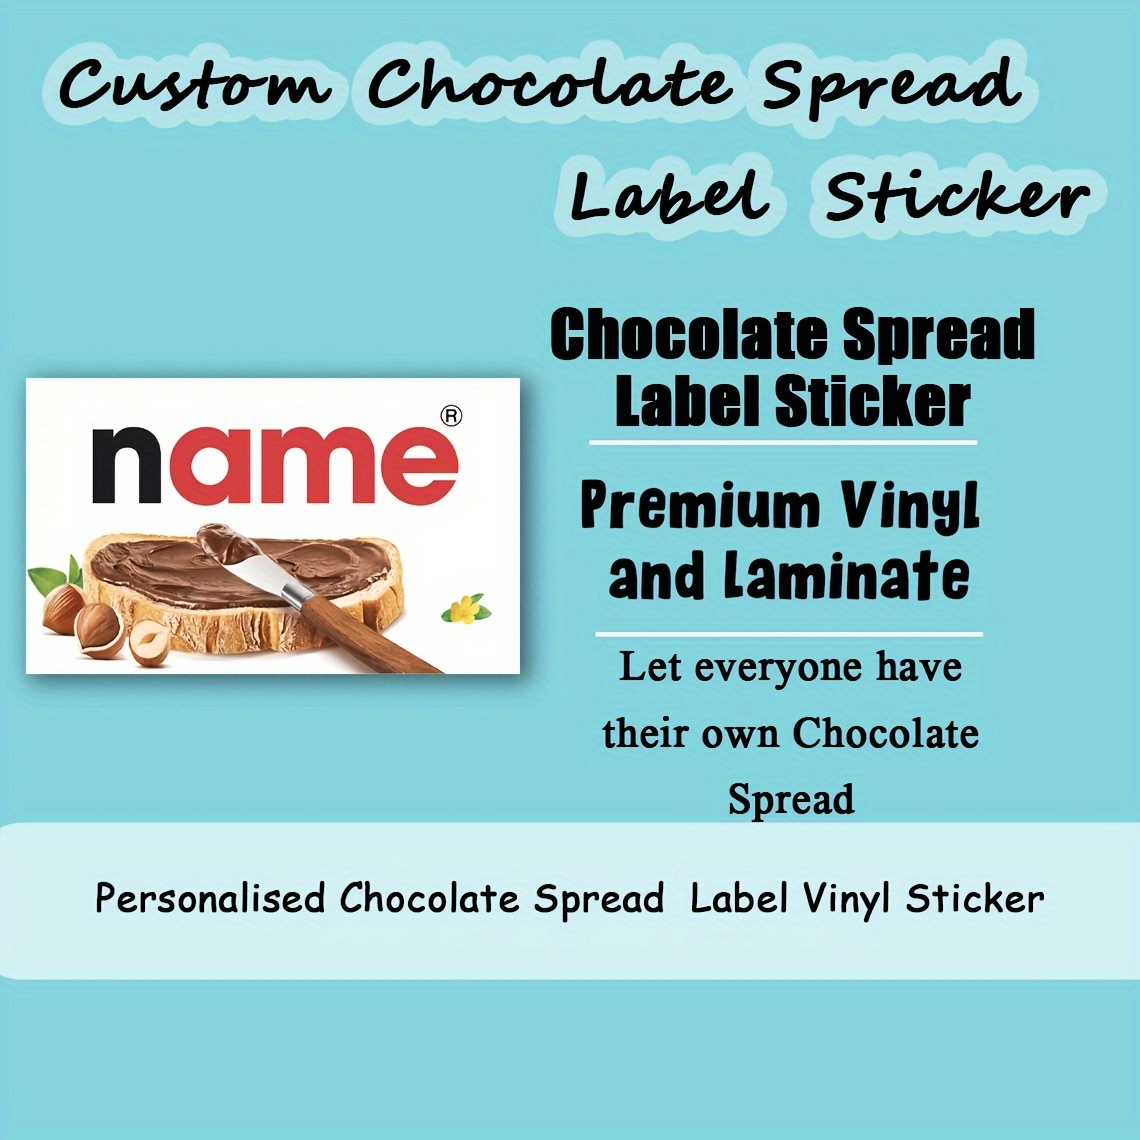 

20pcs Customized Vinyl Stickers, Personalized Chocolate Sauce Labels, A Fun And Unique Gift For Birthdays And Anniversaries